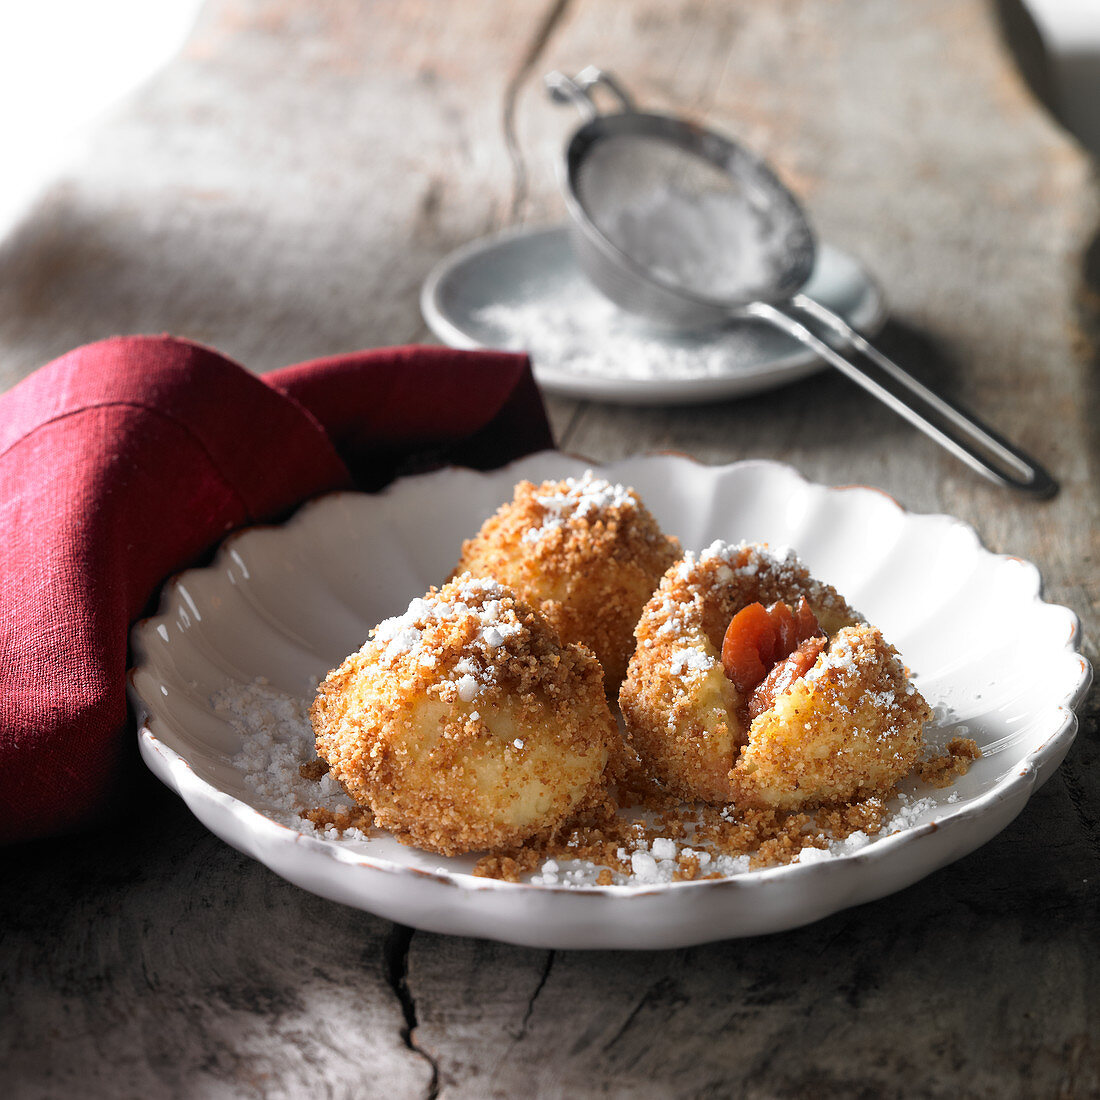 Damson dumplings roasted in butter with breadcrumbs and icing sugar